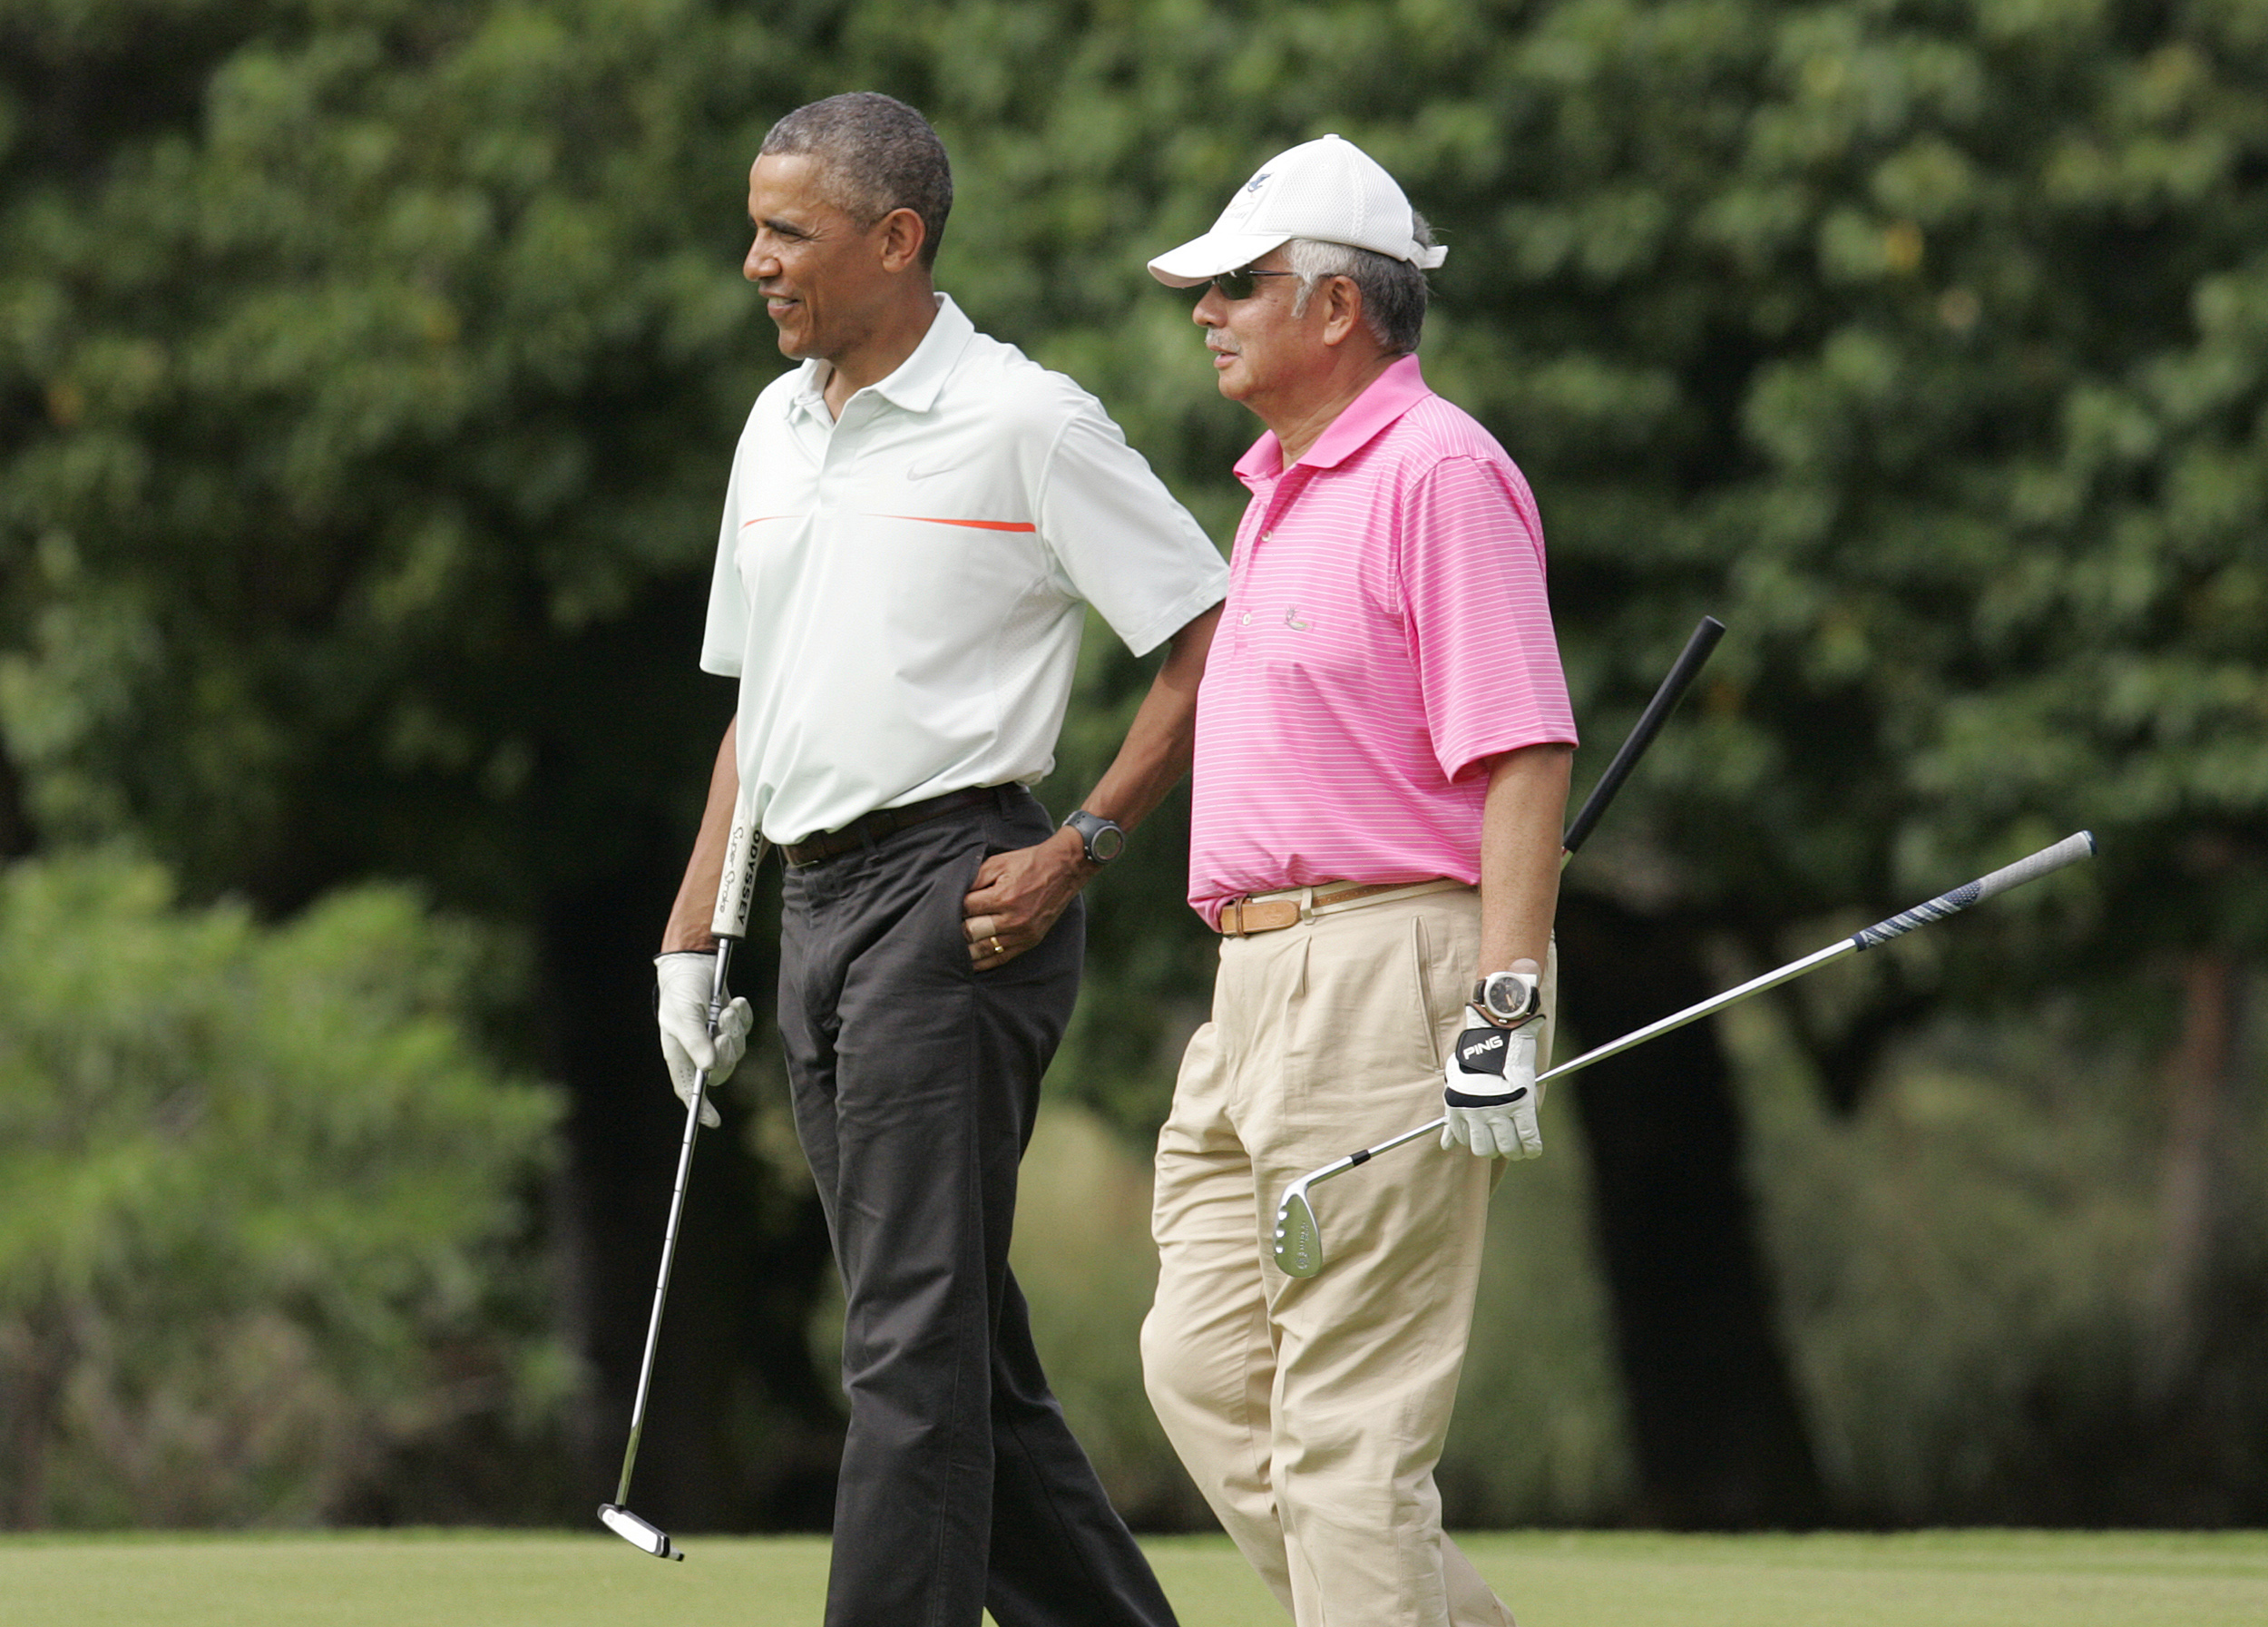 U.S. President Barack Obama and Malaysia's Prime Minister Najib Razak walk off 18th hole while playing a round of golf at the Clipper Golf course on Marine Corps Base Hawaii during Obama's Christmas holiday vacation in Kaneohe, Hawaii, on Dec. 24, 2014 (Hugh Gentry—Reuters)